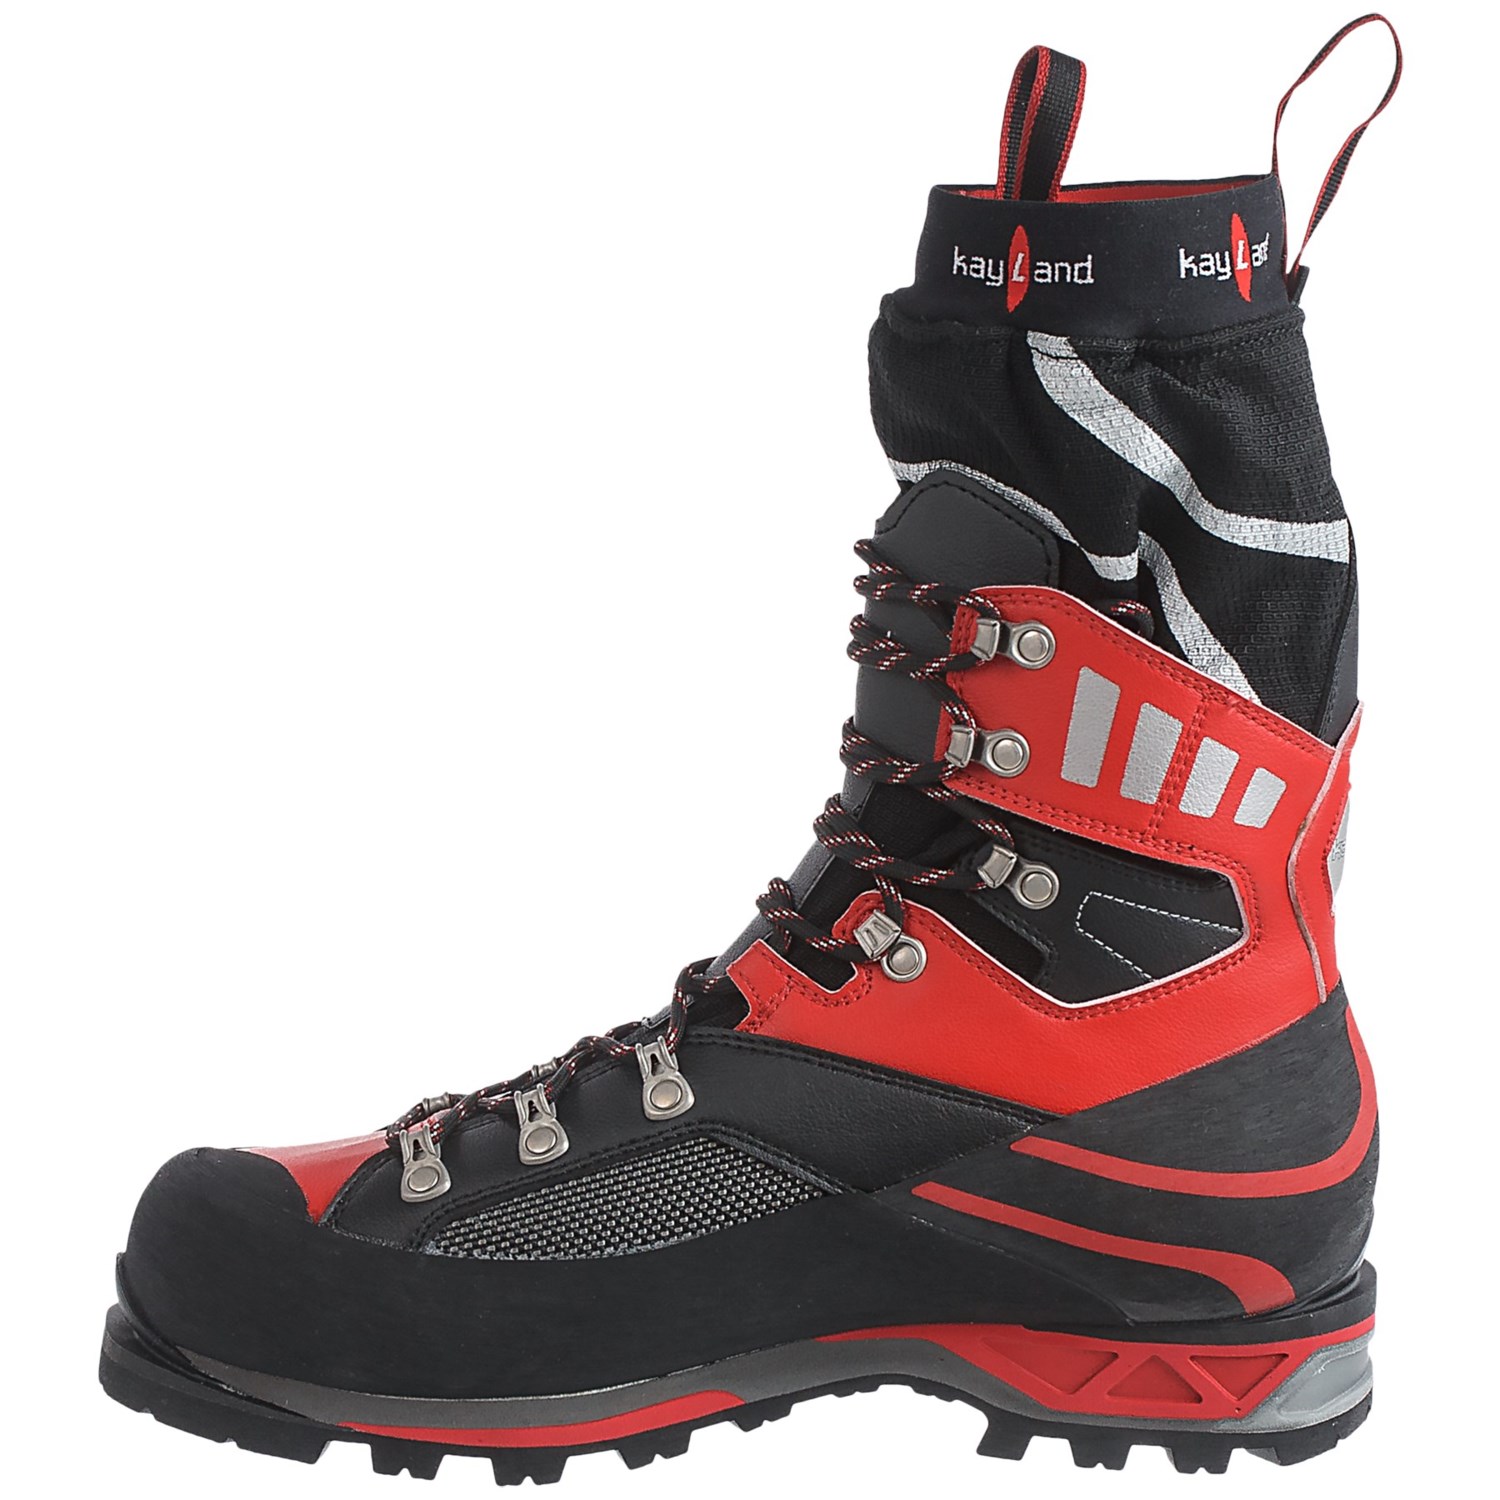 Kayland Apex Plus Gore-Tex® Mountaineering Boots (For Men) - Save 41%